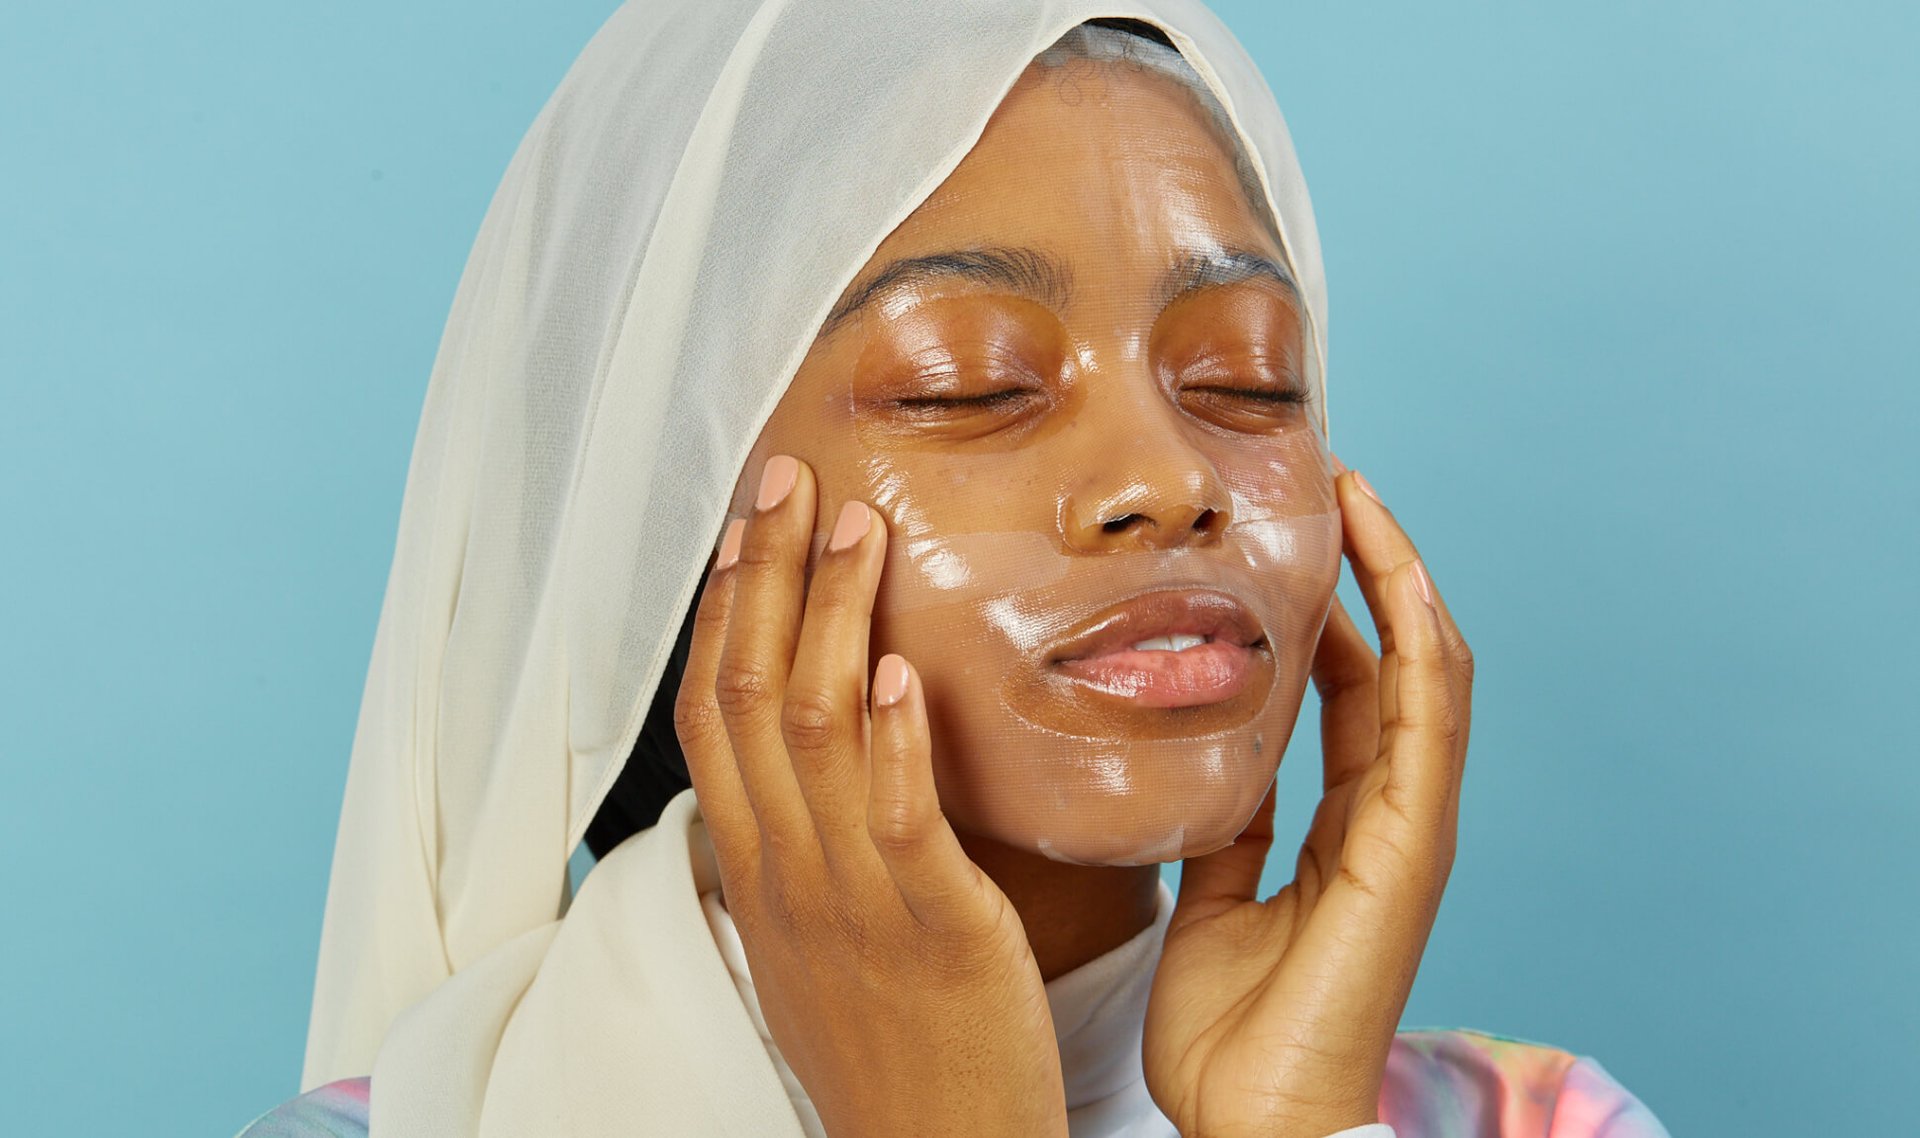 Clay, Sheet or Peel-Off: Which Face Mask Is Right for You?